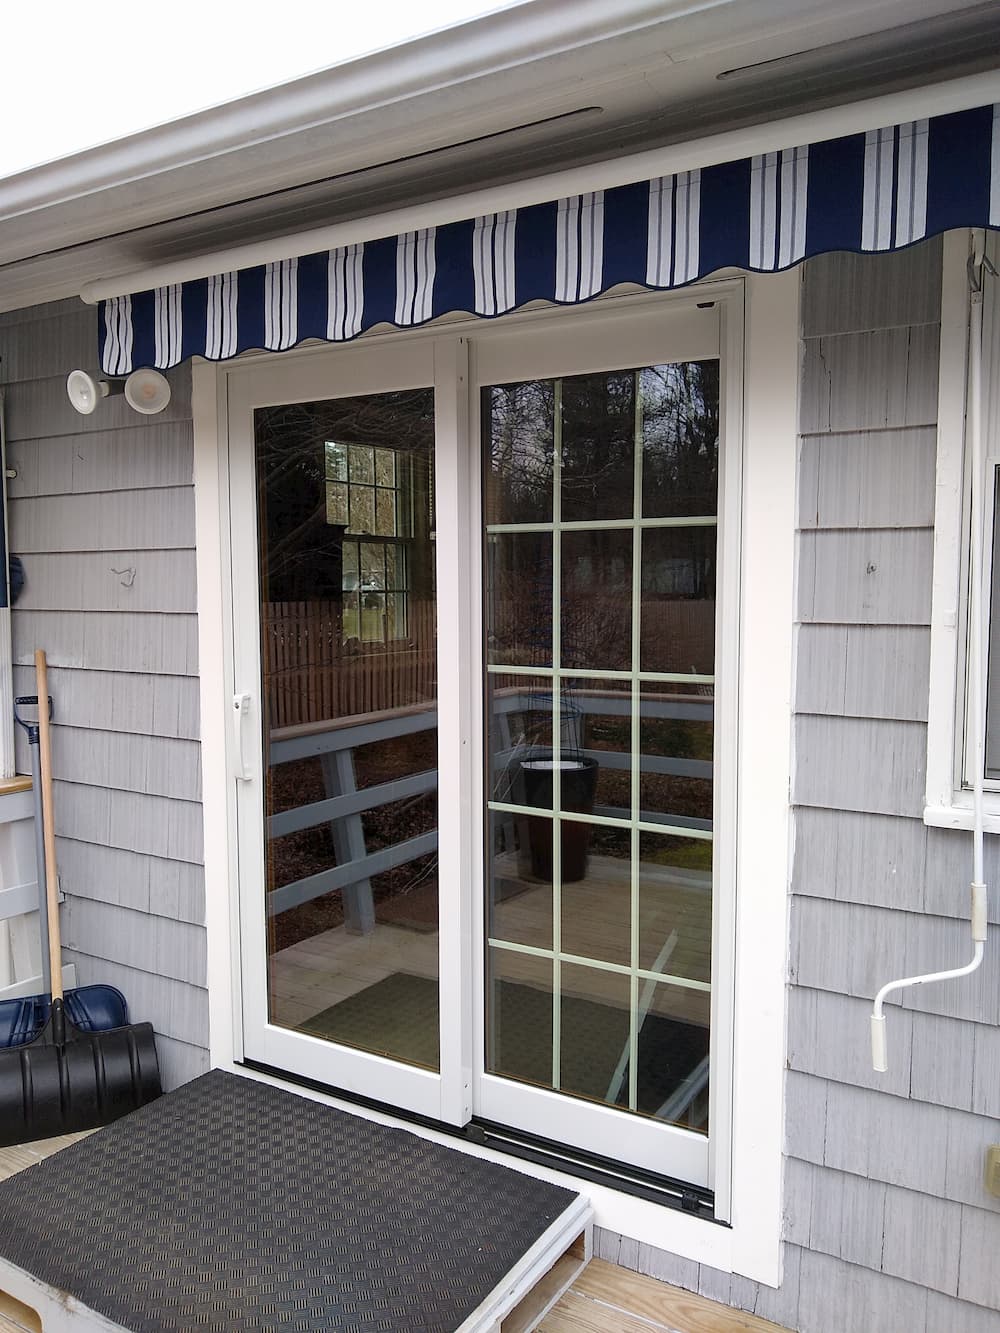 After view of new Pella patio doors in Pittsfield home